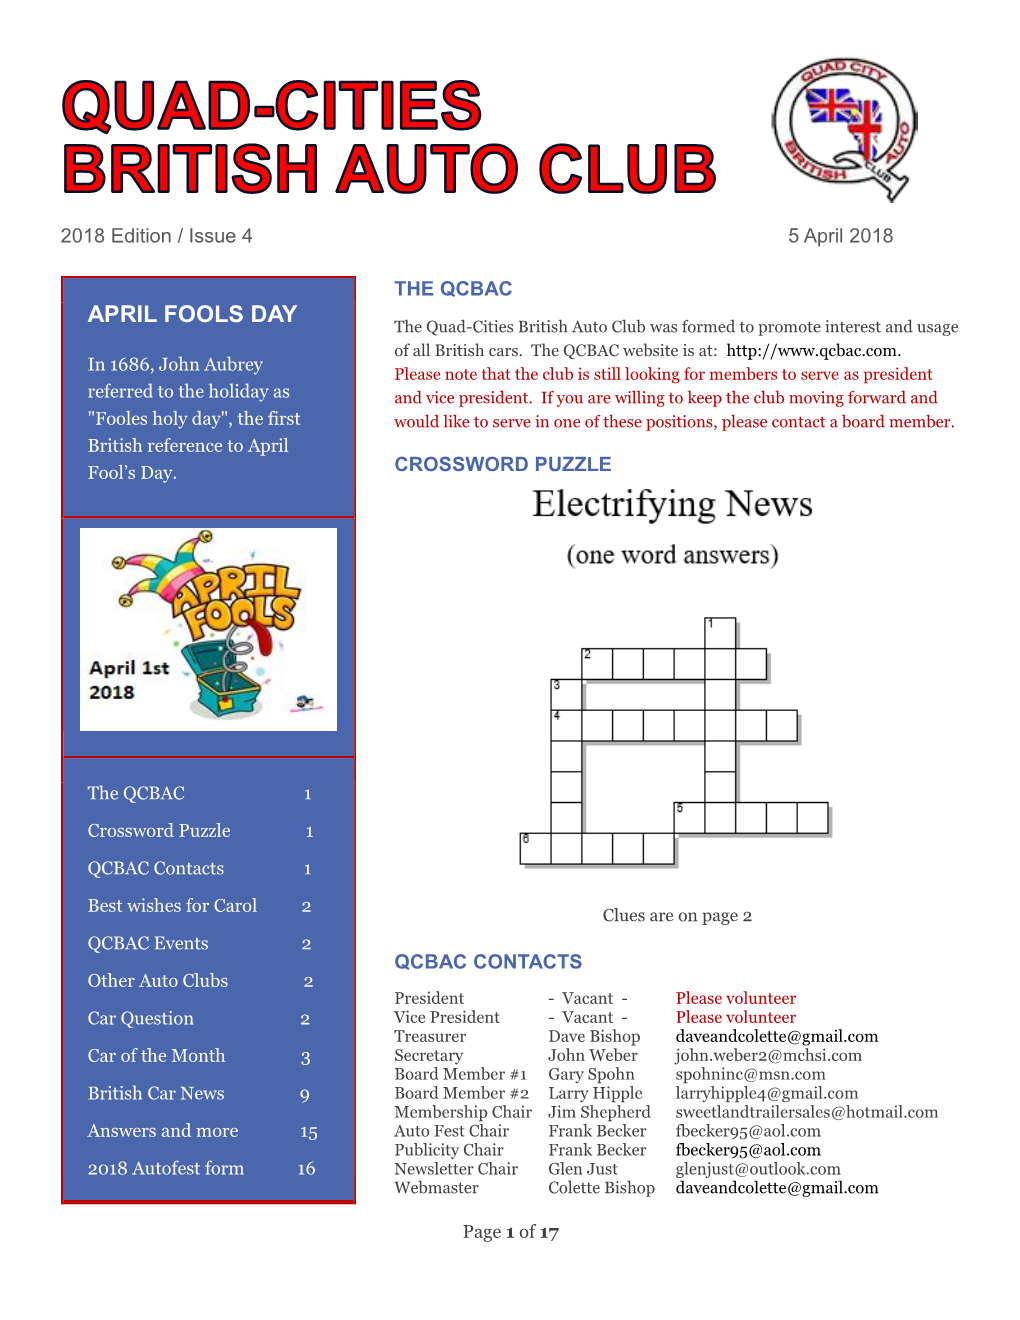 APRIL FOOLS DAY the Quad-Cities British Auto Club Was Formed to Promote Interest and Usage